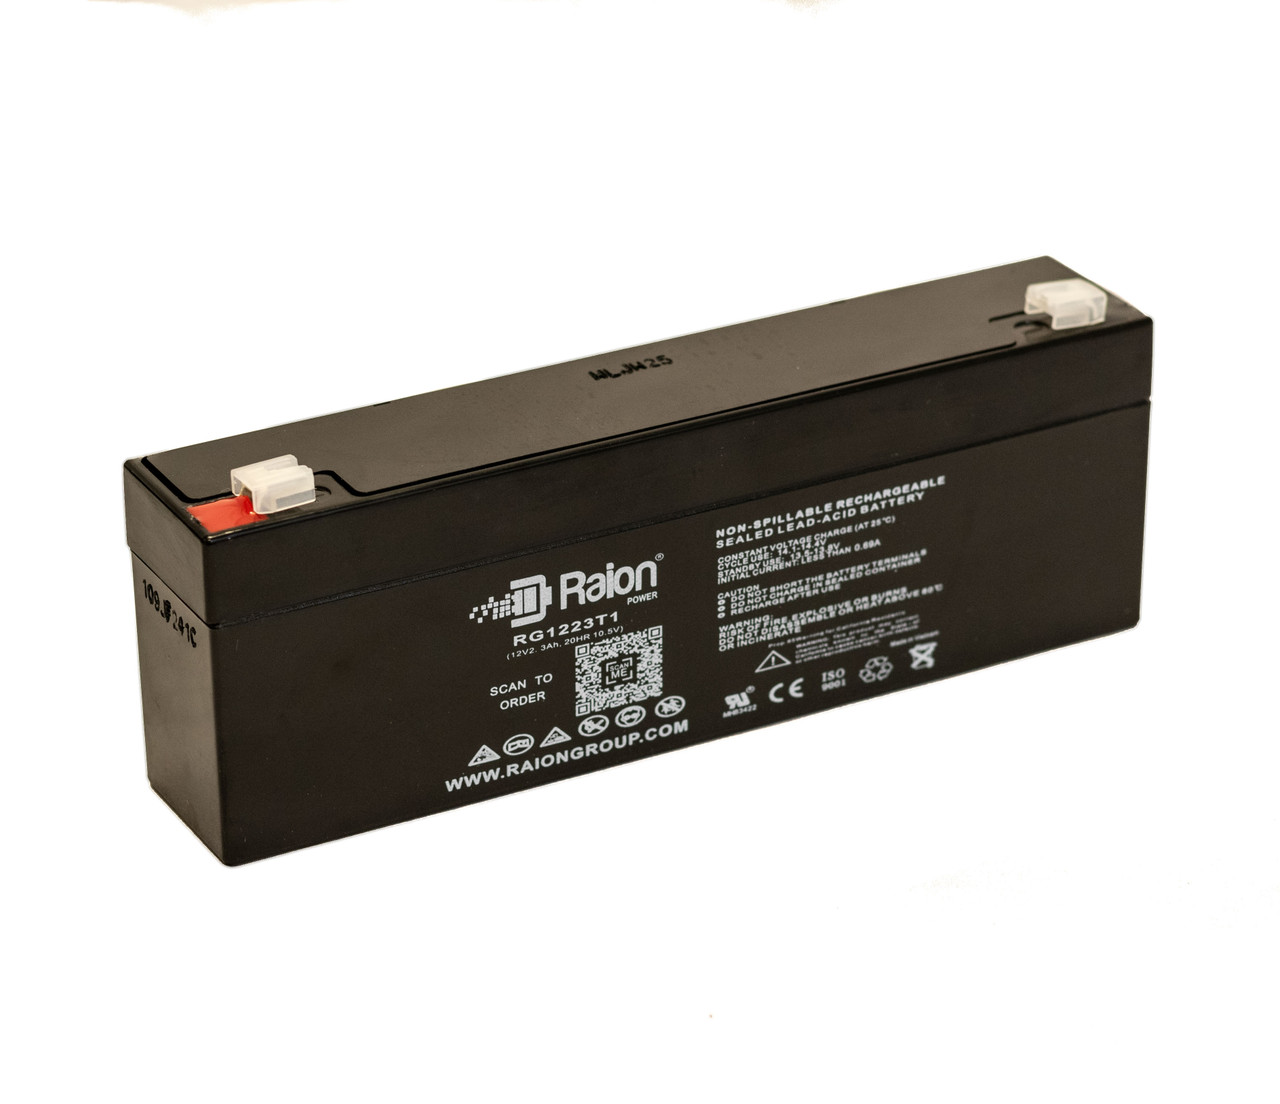 Raion Power RG1223T1 Replacement Battery for Baxter Healthcare AS70